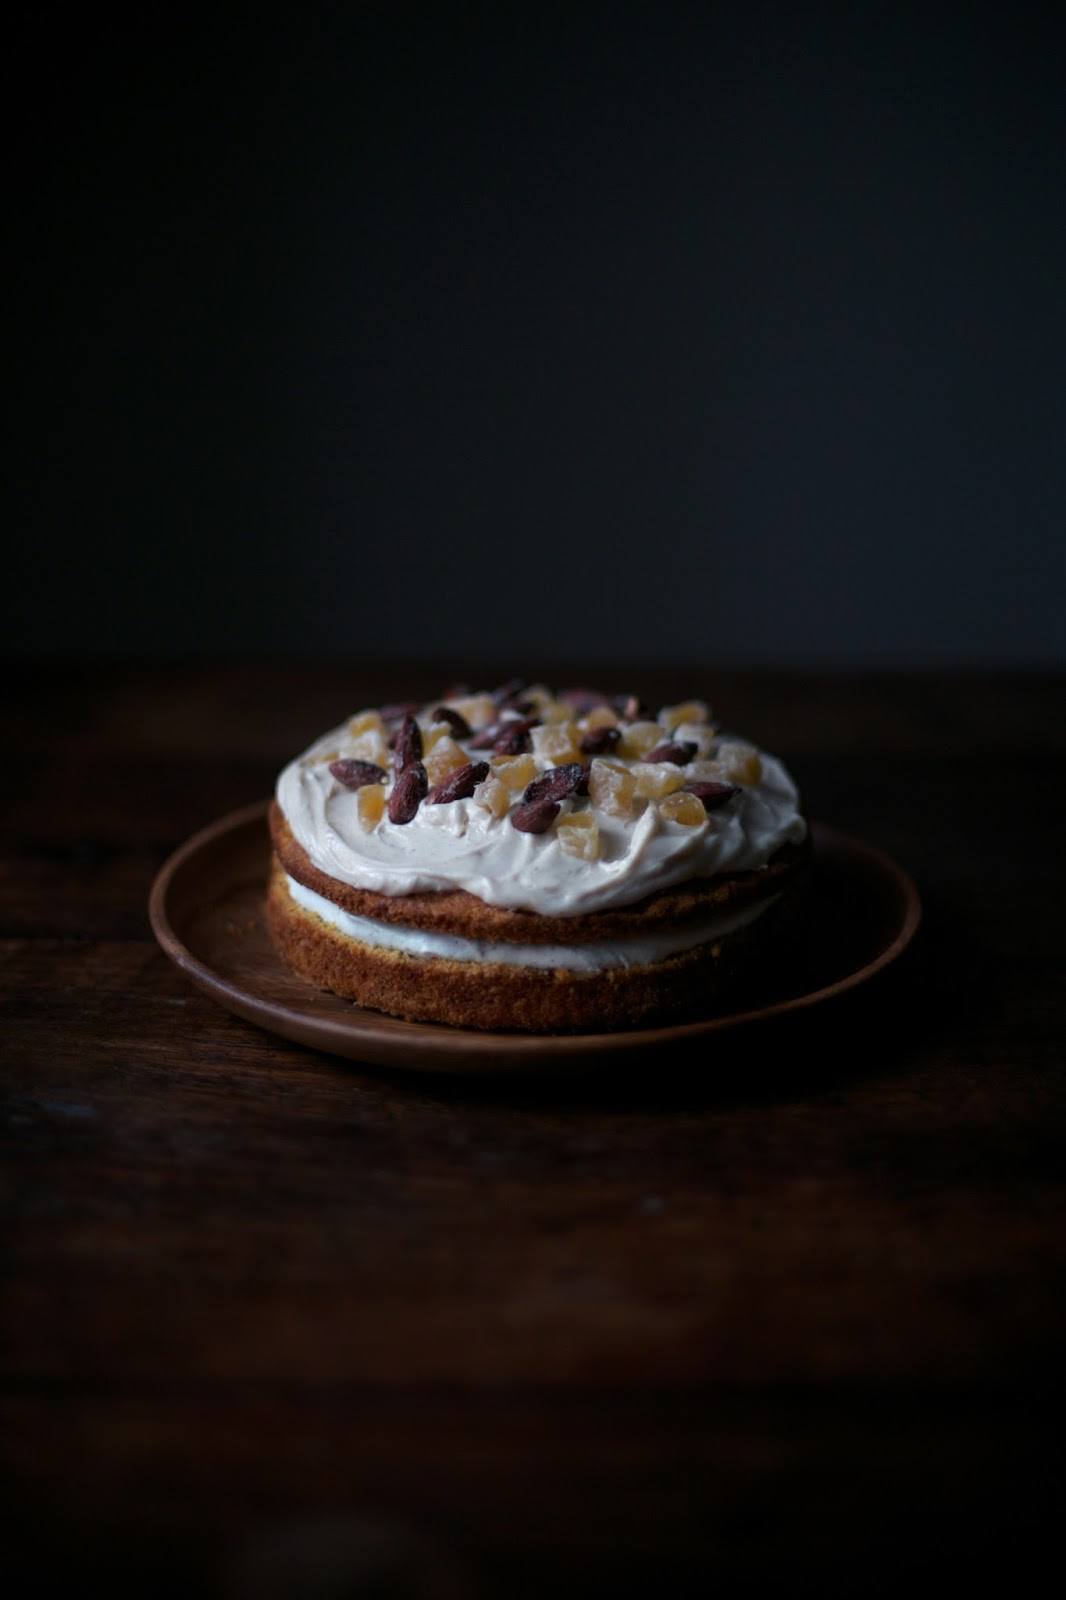 Gluten-free Carrot Cake topped with Ginger and Sea Salt Almonds